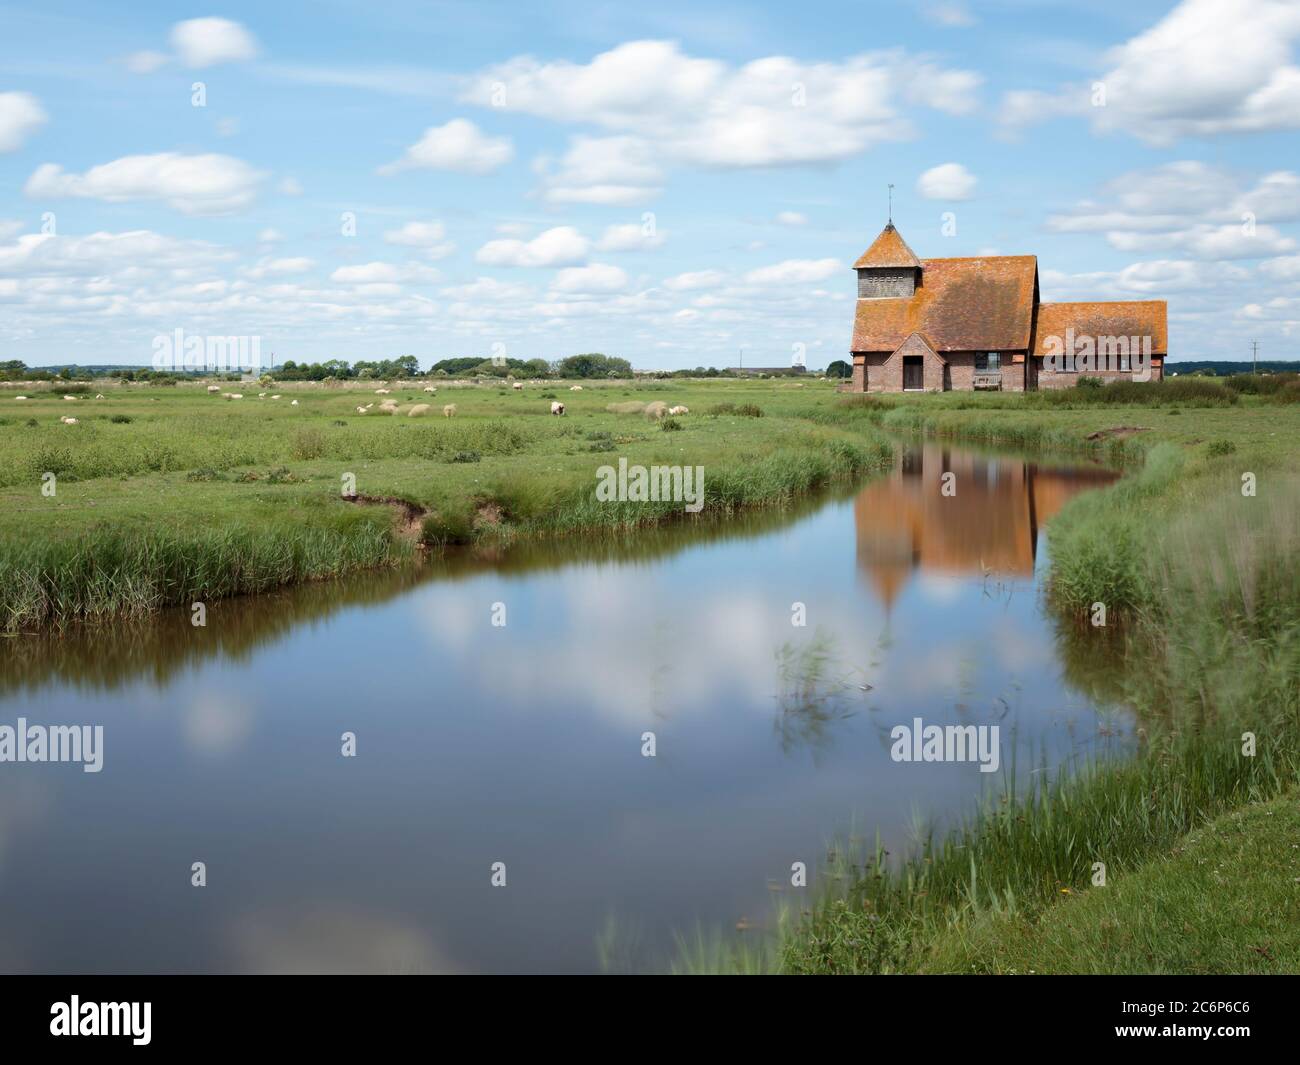 The church of St Thomas à Becket reflected in a canal near Brookland, Romney Marsh, England Stock Photo